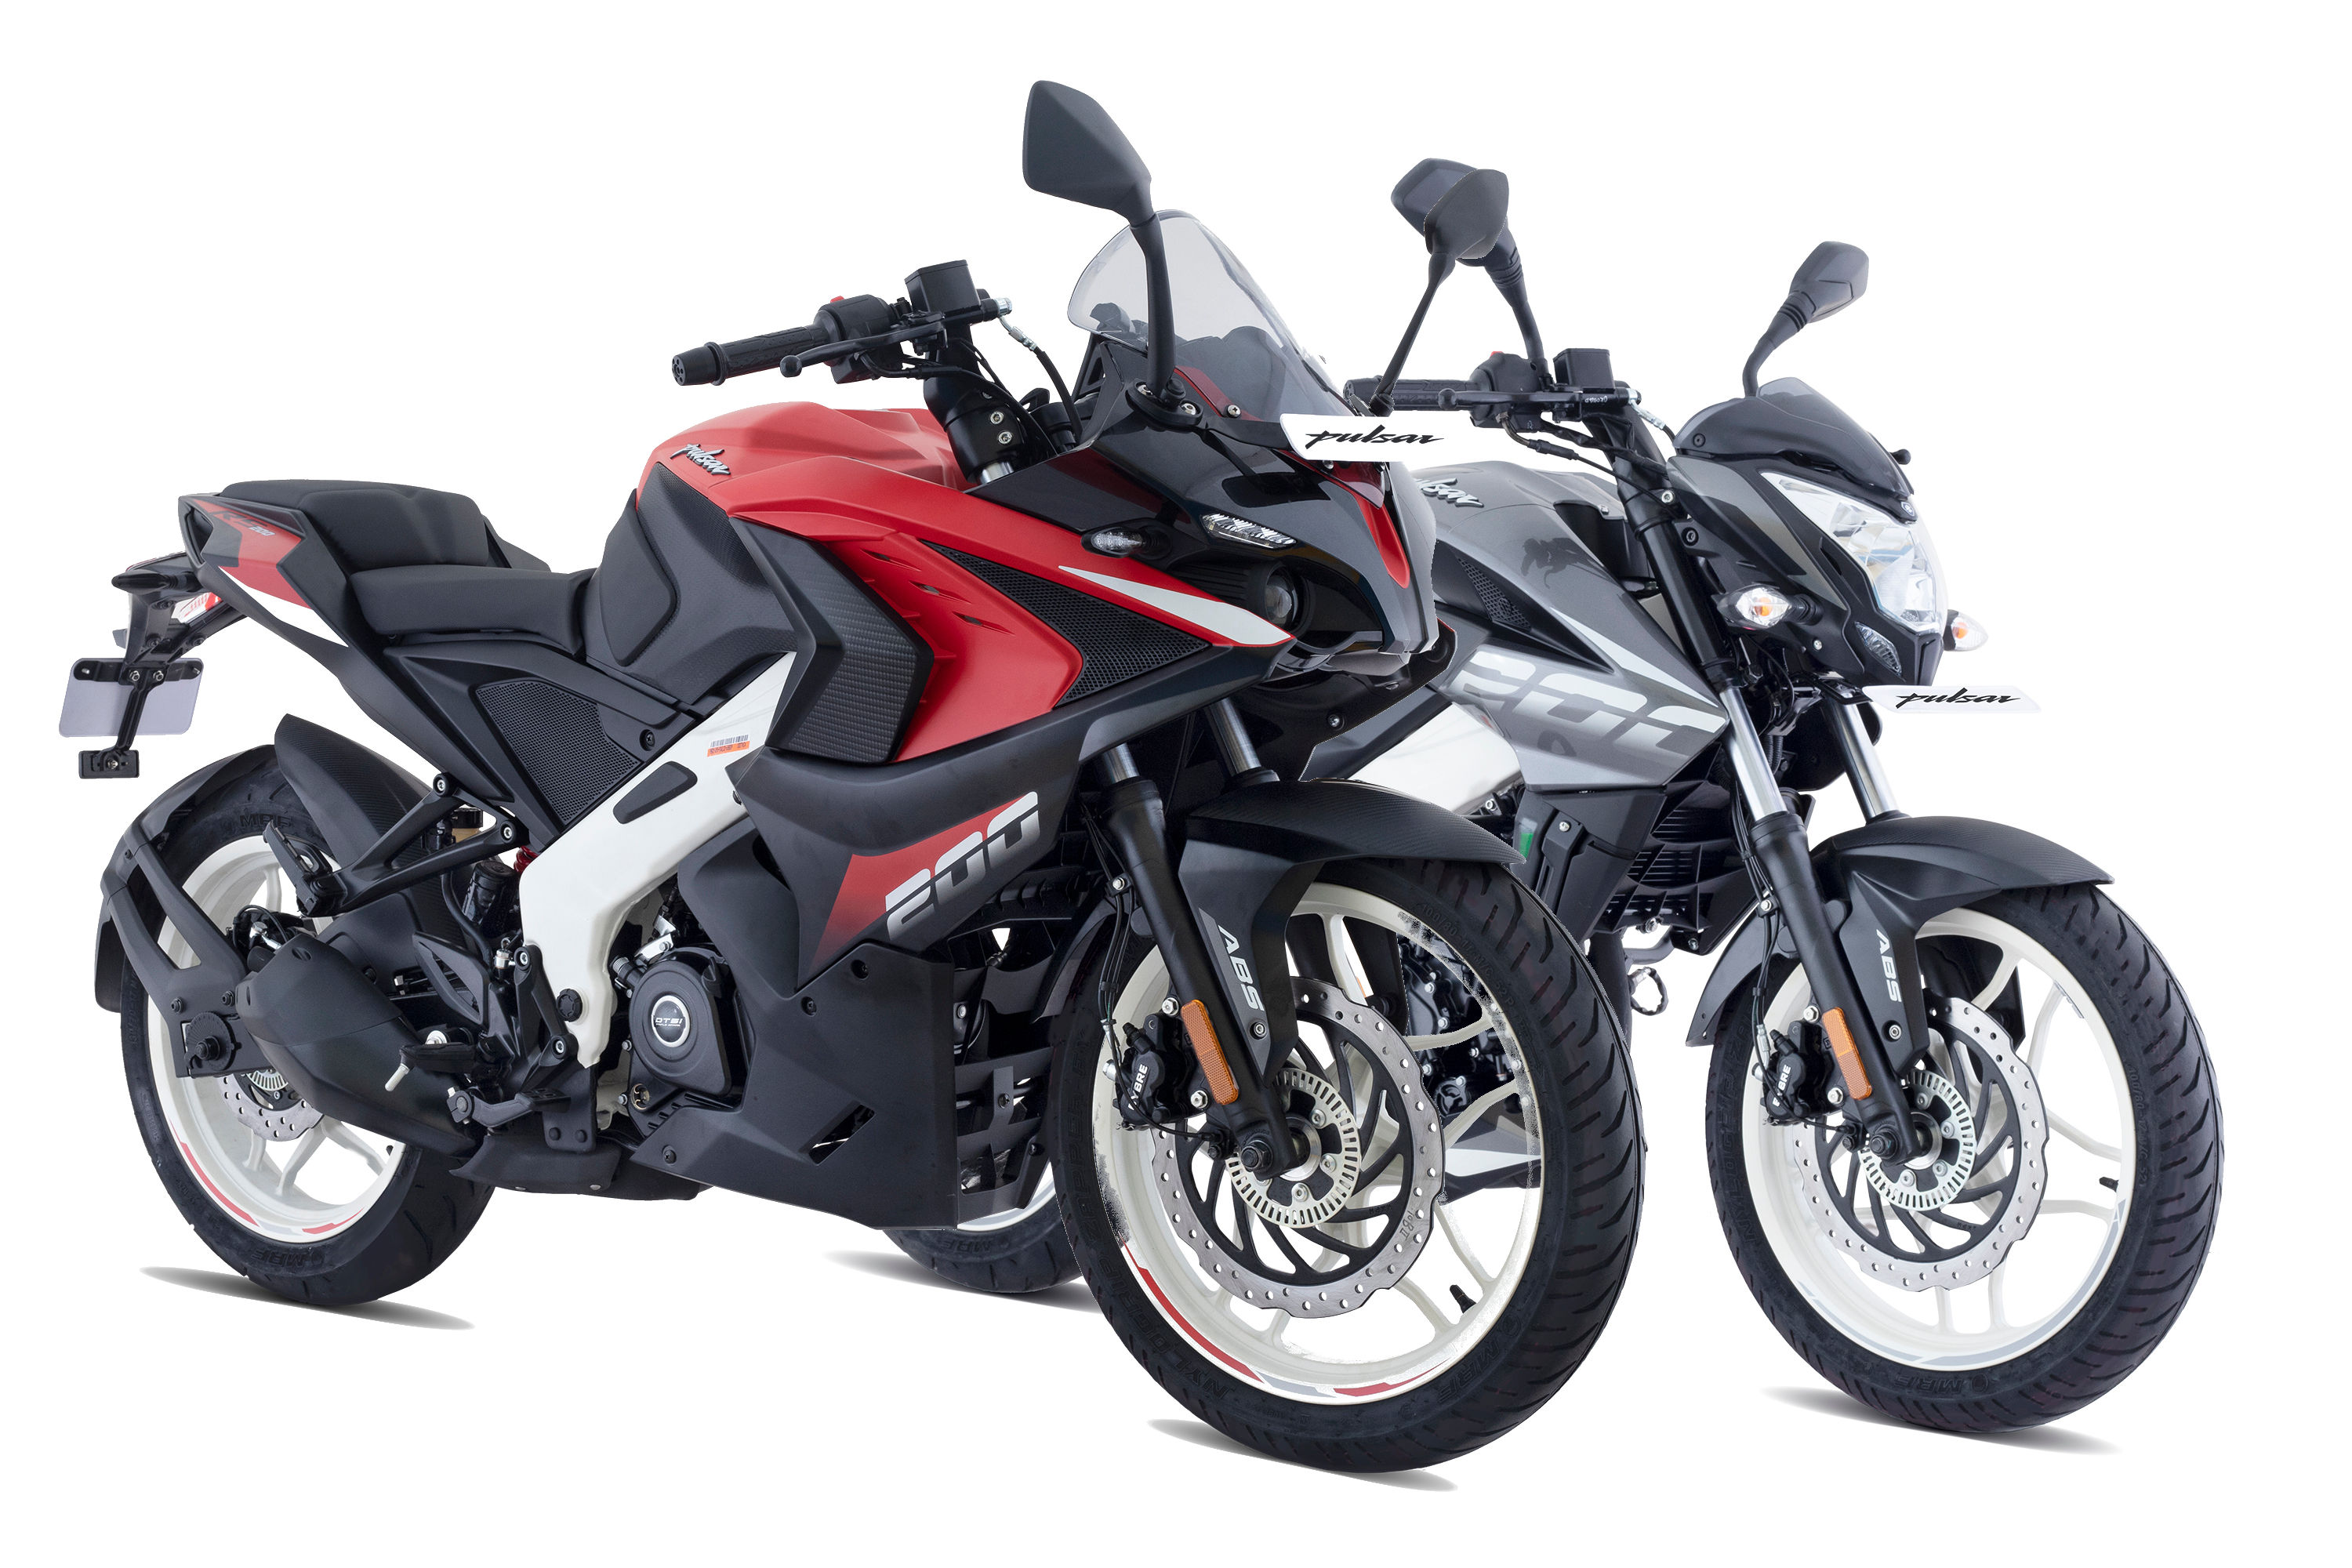 Bajaj Pulsar RS200, NS200 And NS160 Get New Colours